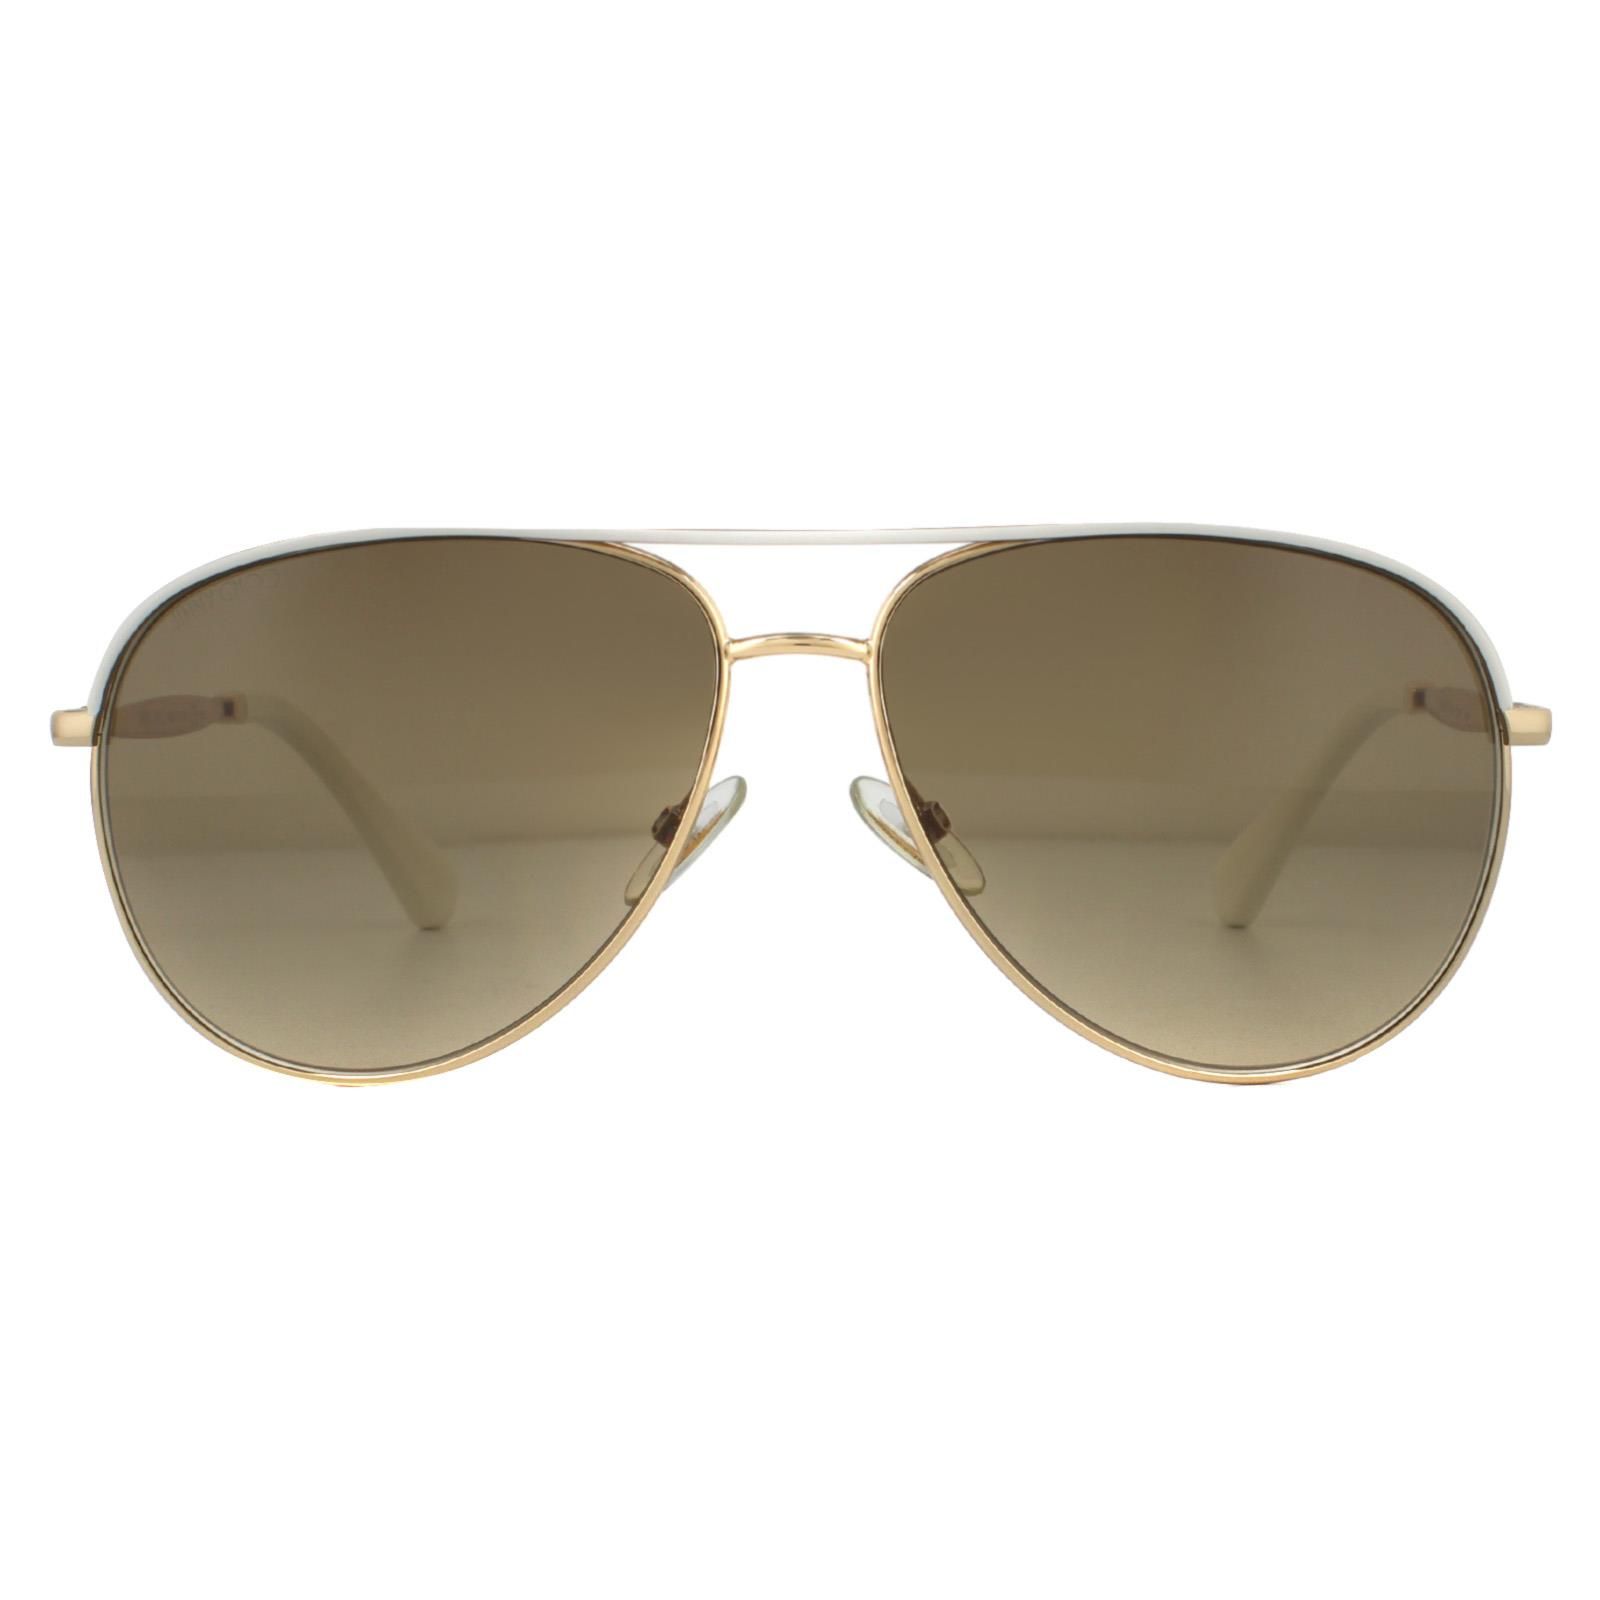 Jimmy Choo Sunglasses Jewly/S 150 S1 Rose Gold Ivory Brown Gradient are a classic aviator design with jewel embellished temples for a feminine touch.